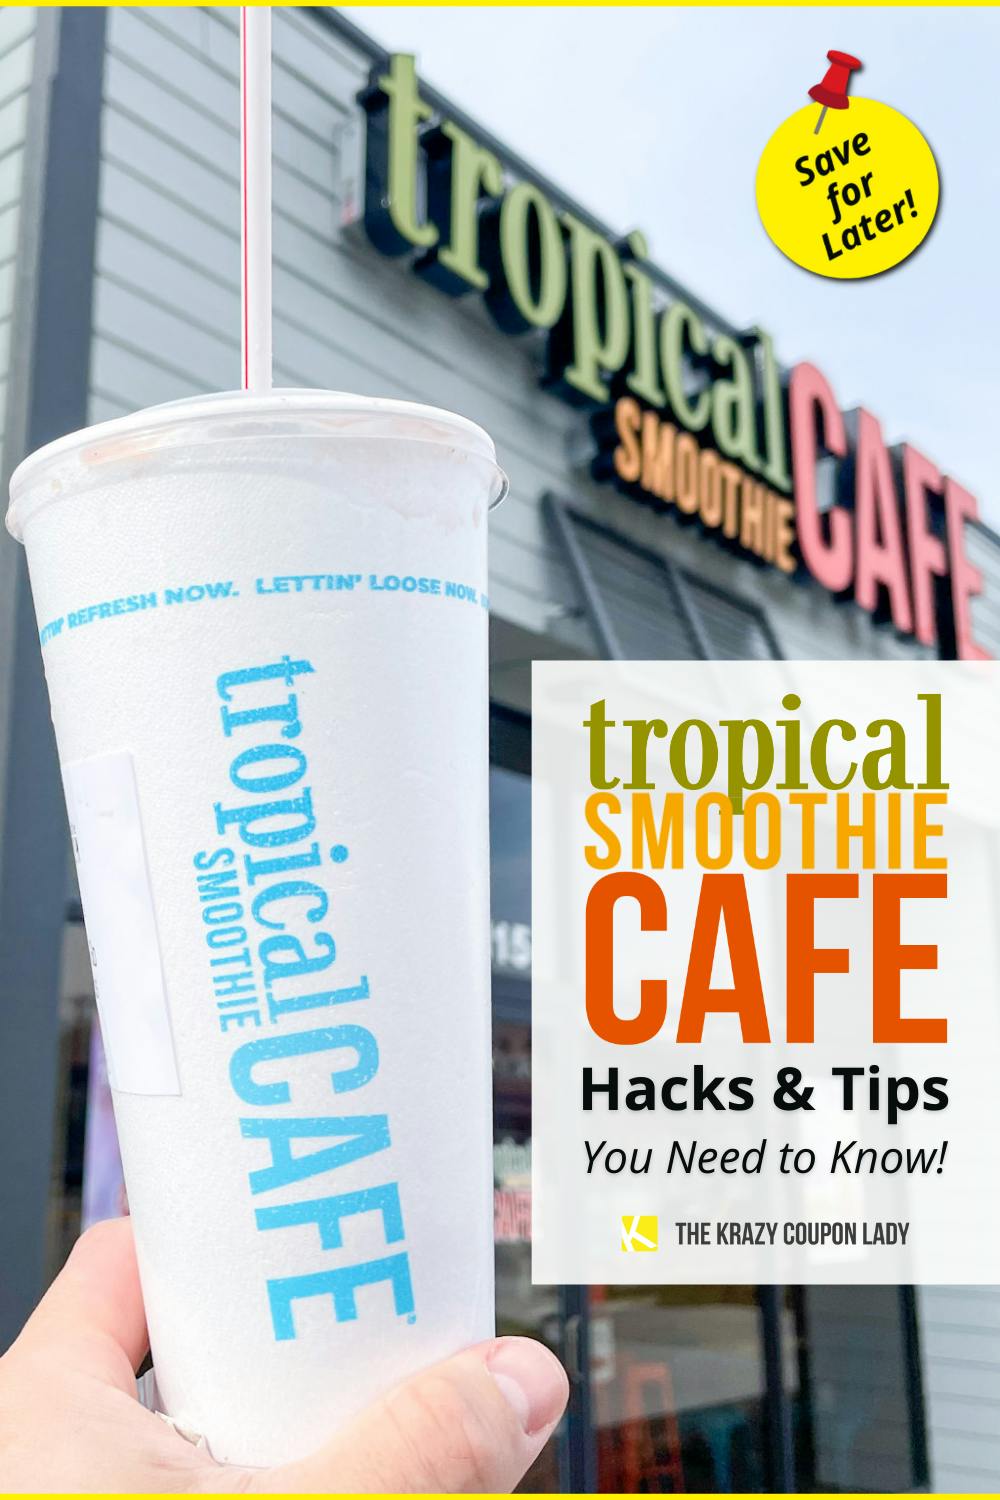 18 Tropical Smoothie Menu Hacks That'll Get You All the Smoothies